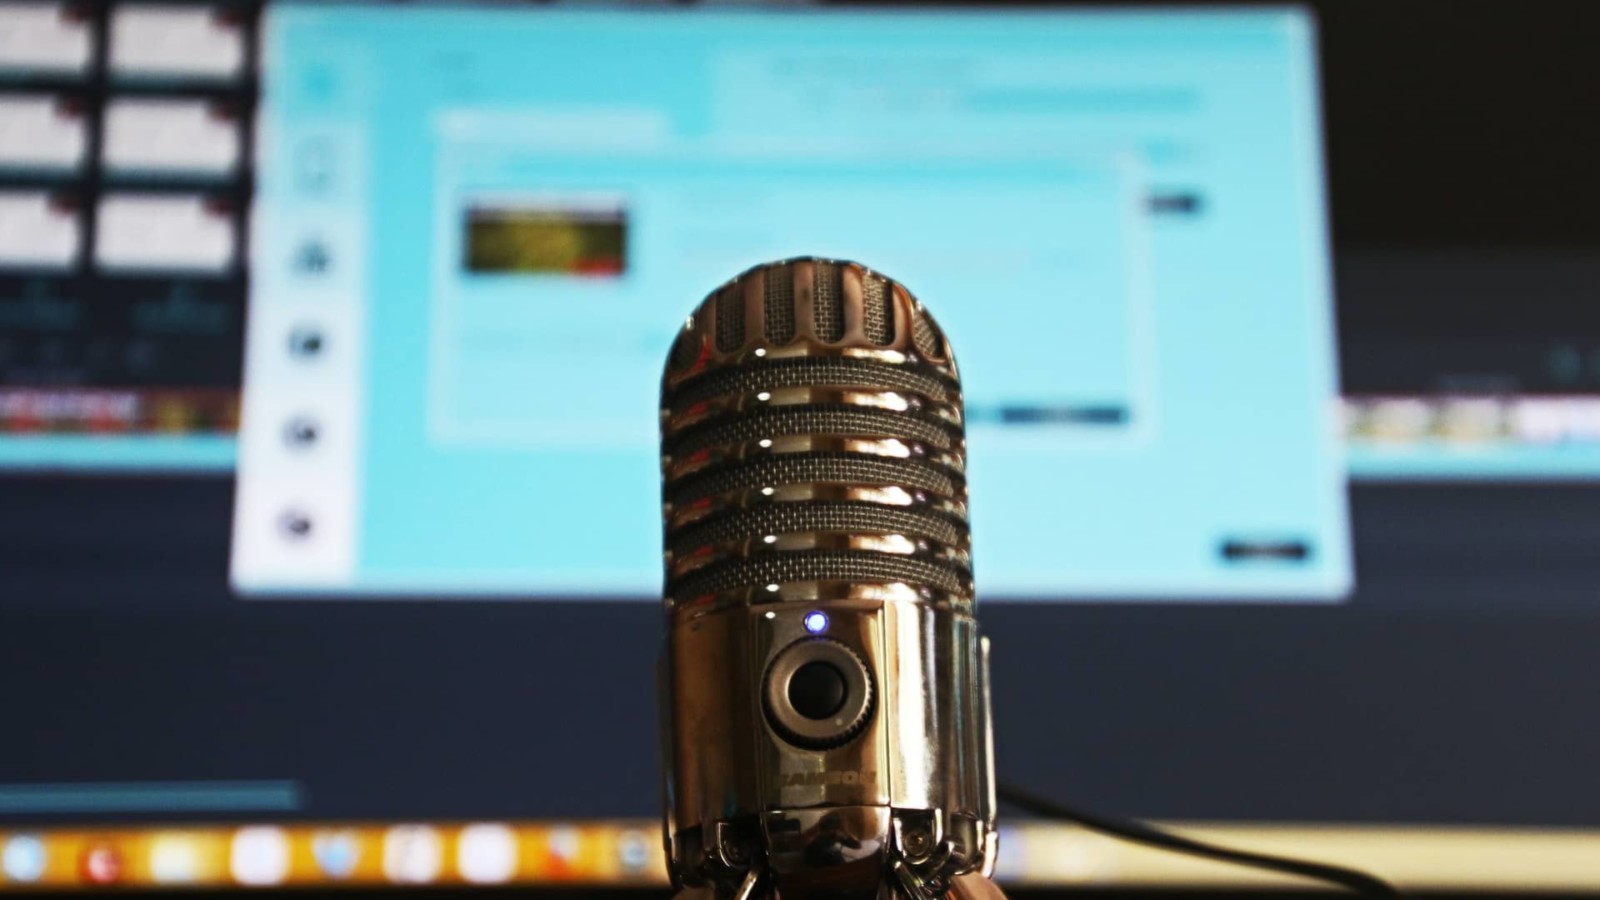 10 Podcasting Do’s and Don’ts To Capture More Engaged Audience